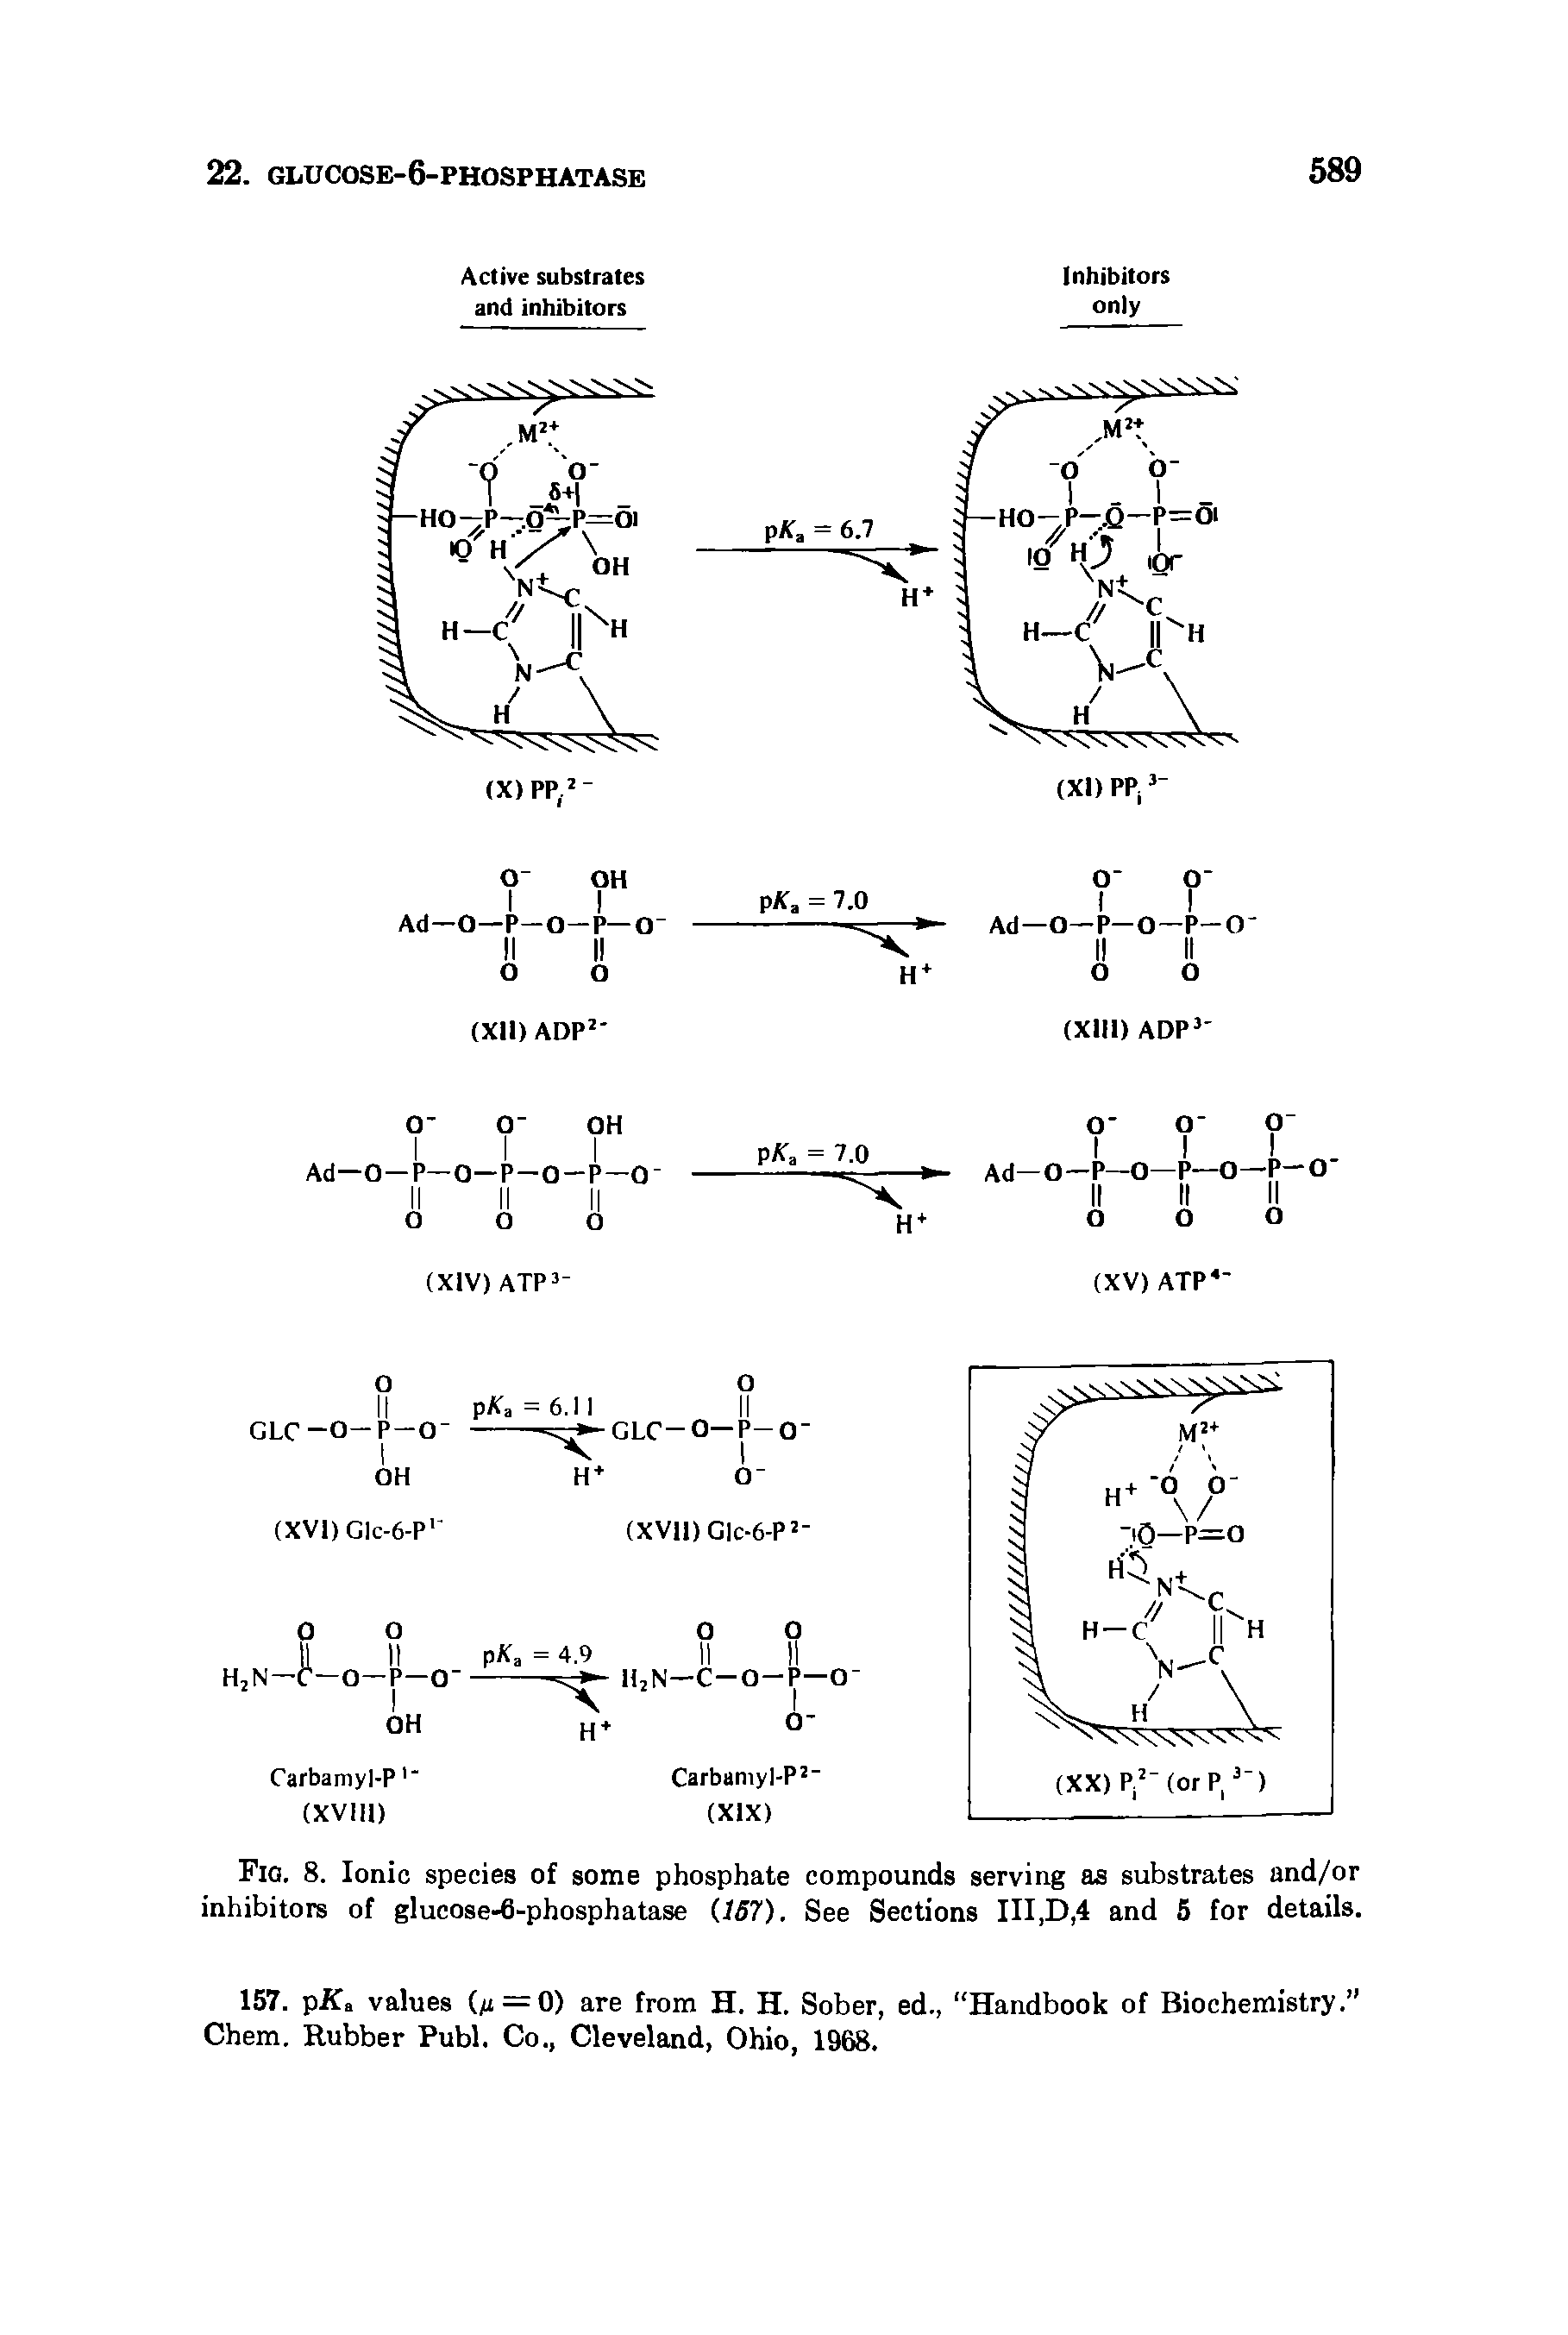 Fig. 8. Ionic species of some phosphate compounds serving as substrates and/or inhibitors of glucose-6-phosphatase (157). See Sections III,D,4 and 5 for details.